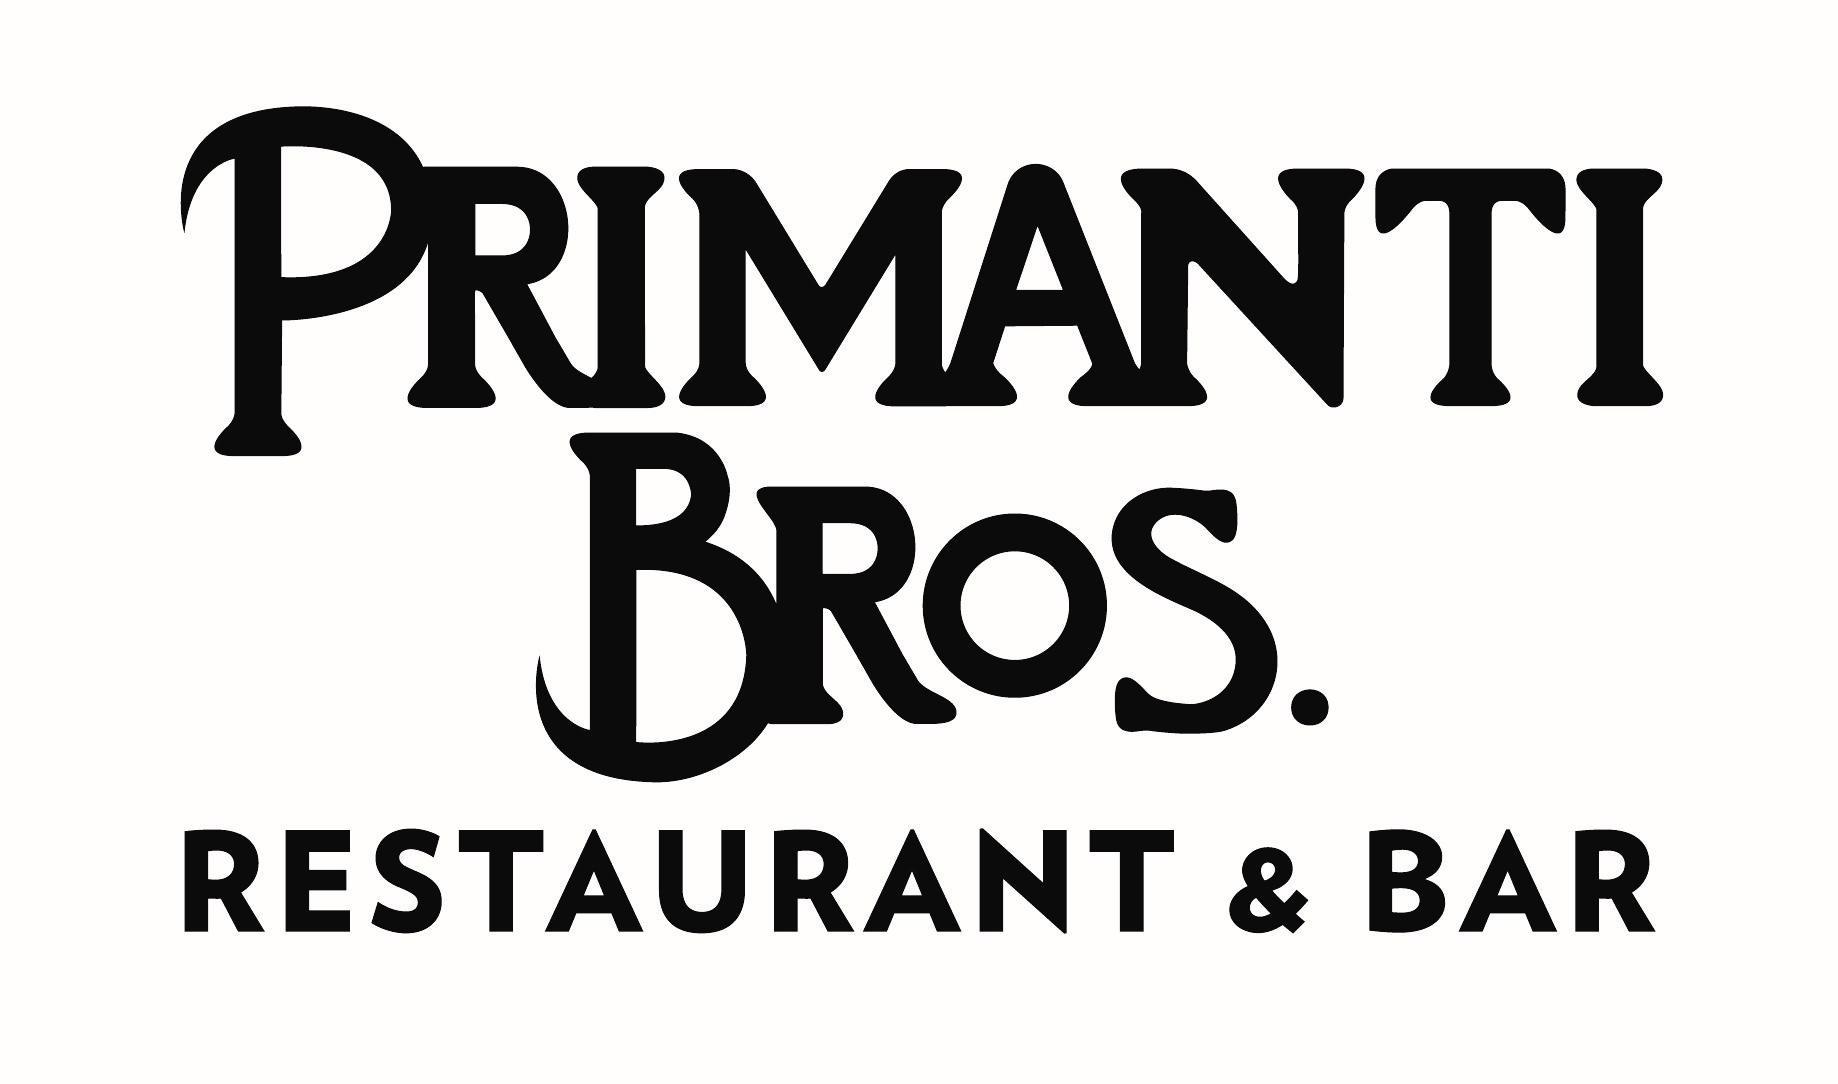 Pittsburgh’s legendary Primanti Bros. to open first airport location at Pittsburgh International Airport